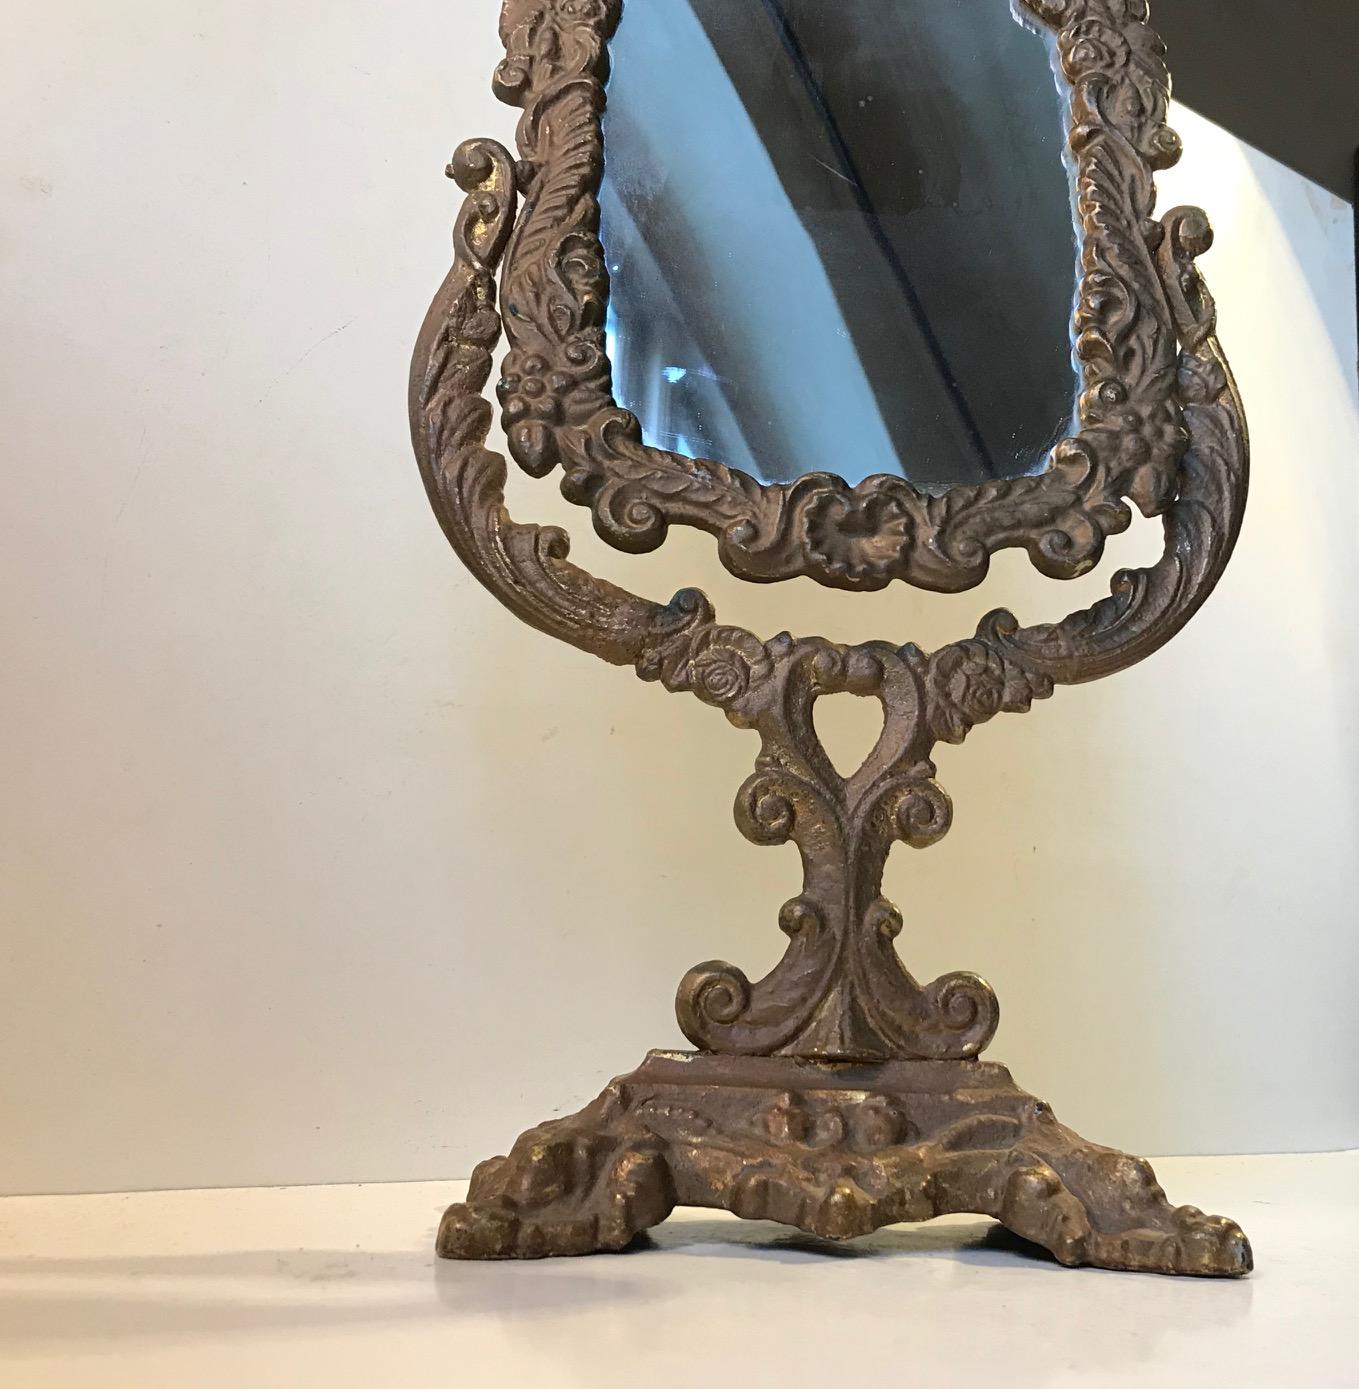 Late Victorian vanity/table mirror/ make-up mirror in cast iron. It has been painted a long time ago in a color that mimics patinated bronze. Possibly an original paint job. It has a few scuffs here and there giving it a shabby chic look. It rotates